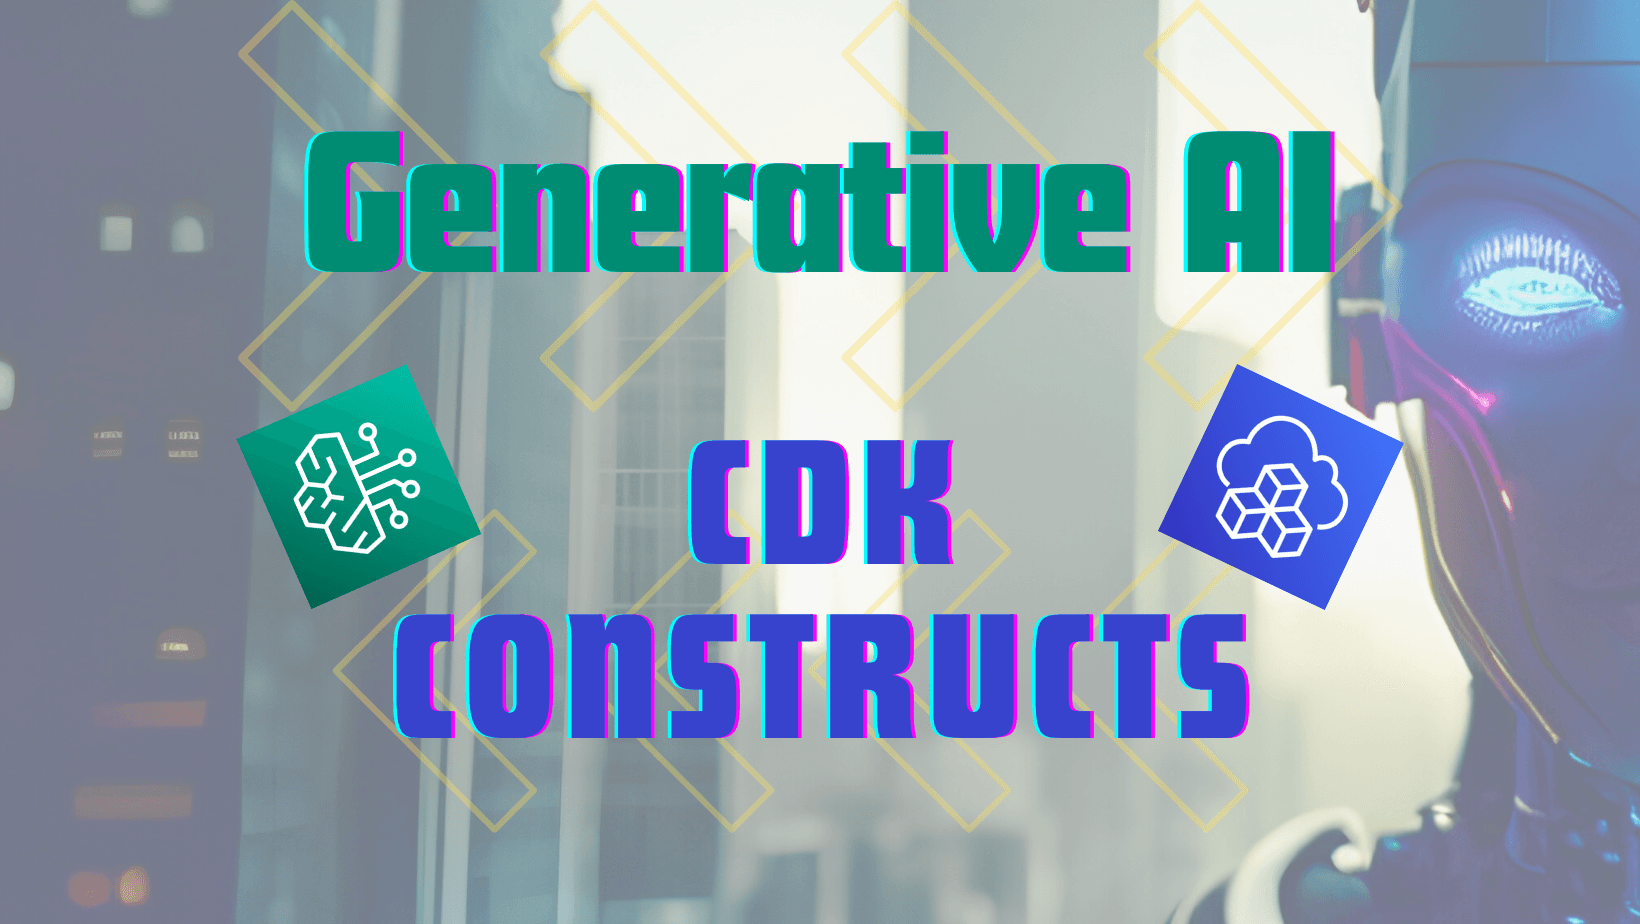 Mastering the Creative Alchemy: Generative AI CDK Constructs for Your Apps